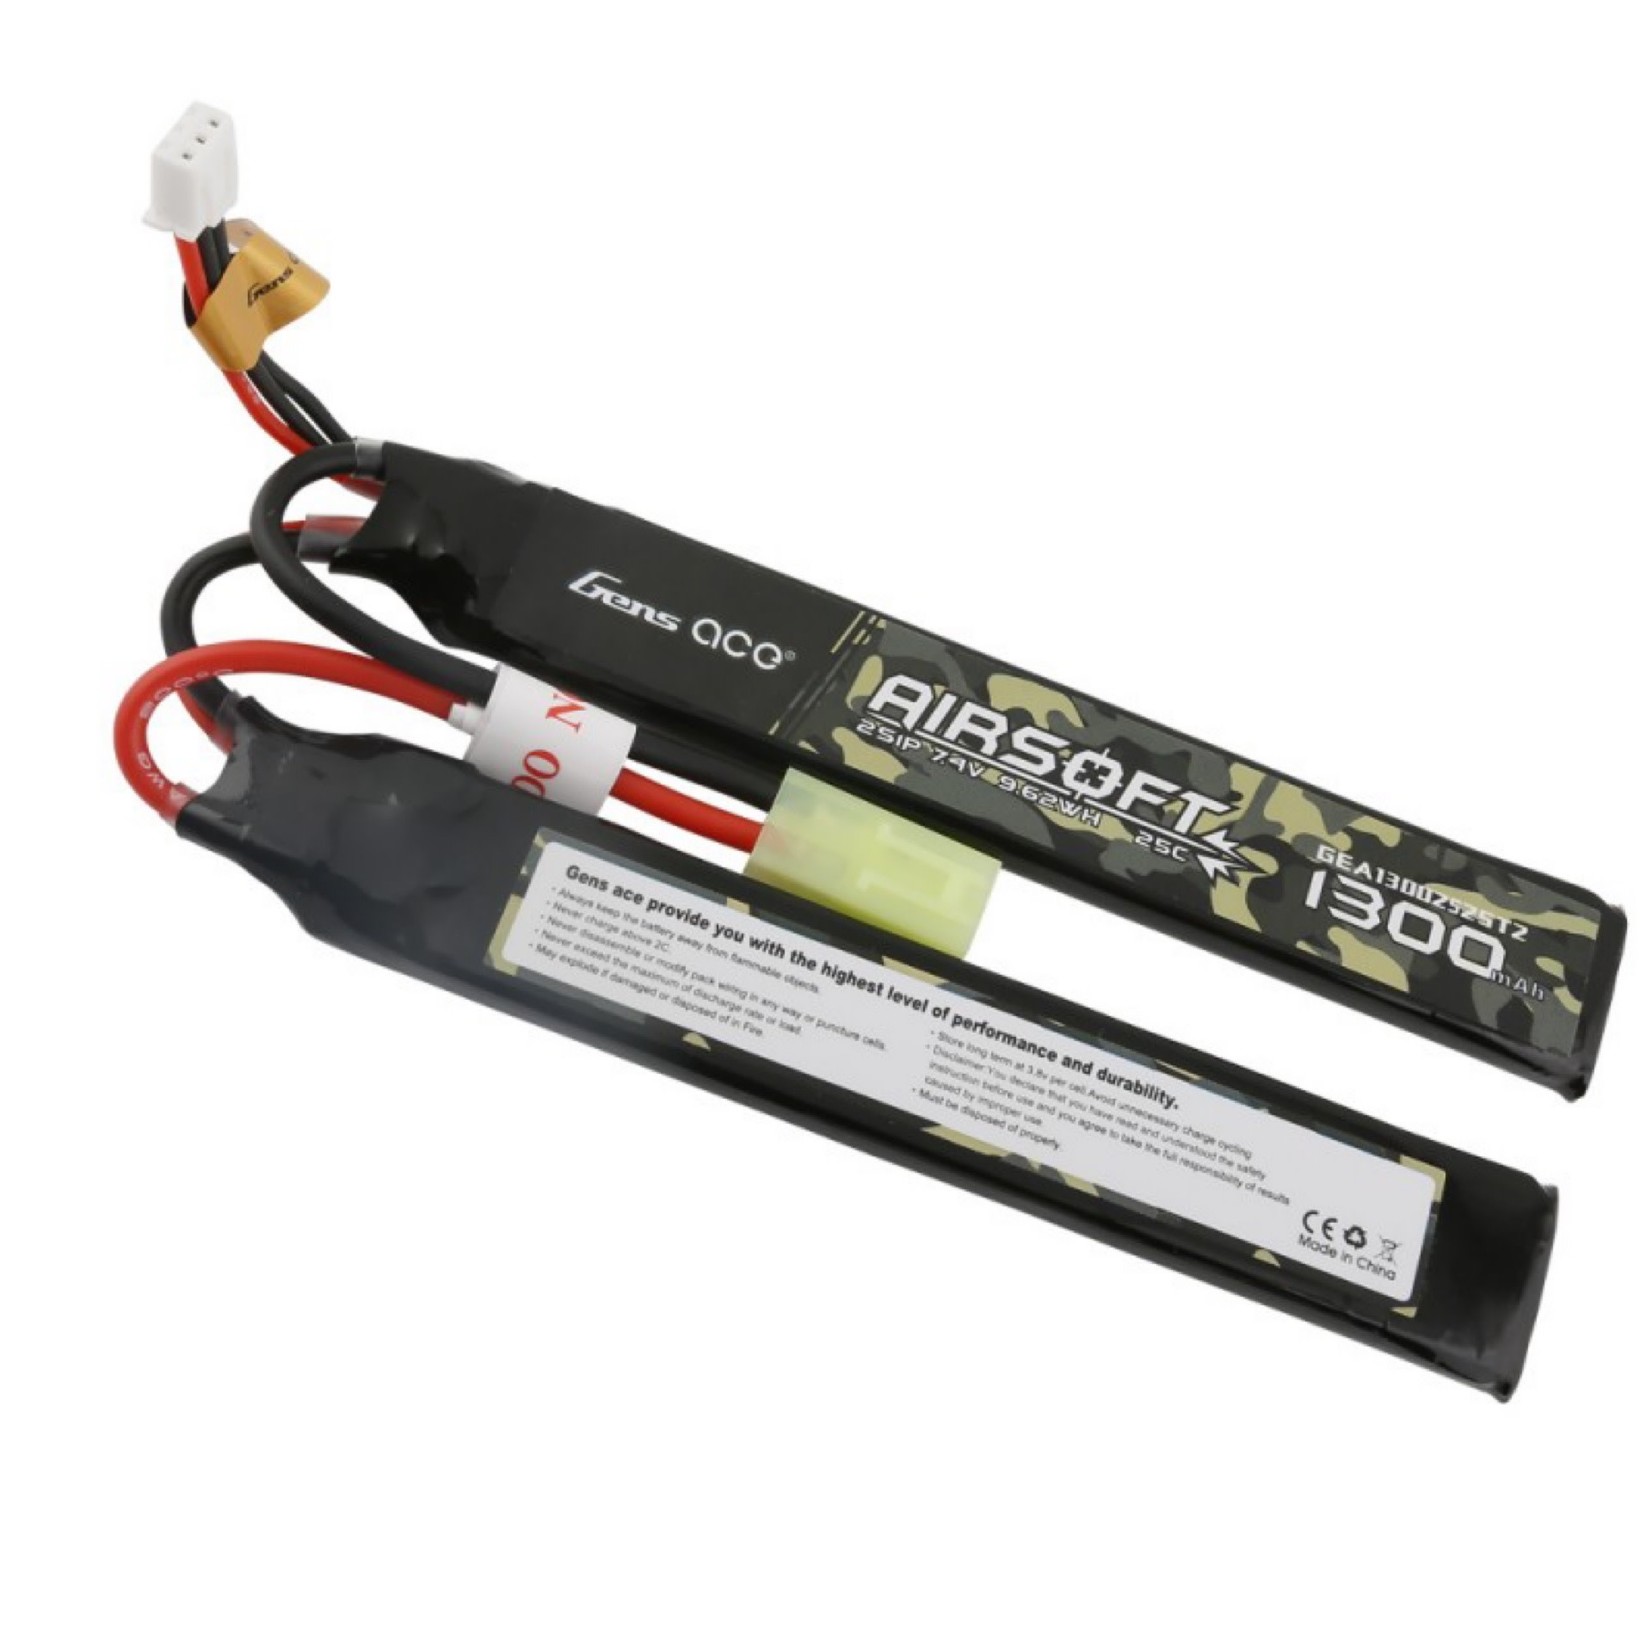 Gens Ace Gens Ace 25C 1300mAh 2S1P 7.4V 2X Airsoft Gun Battery with Tamiya Plug # GEA13002S25T2